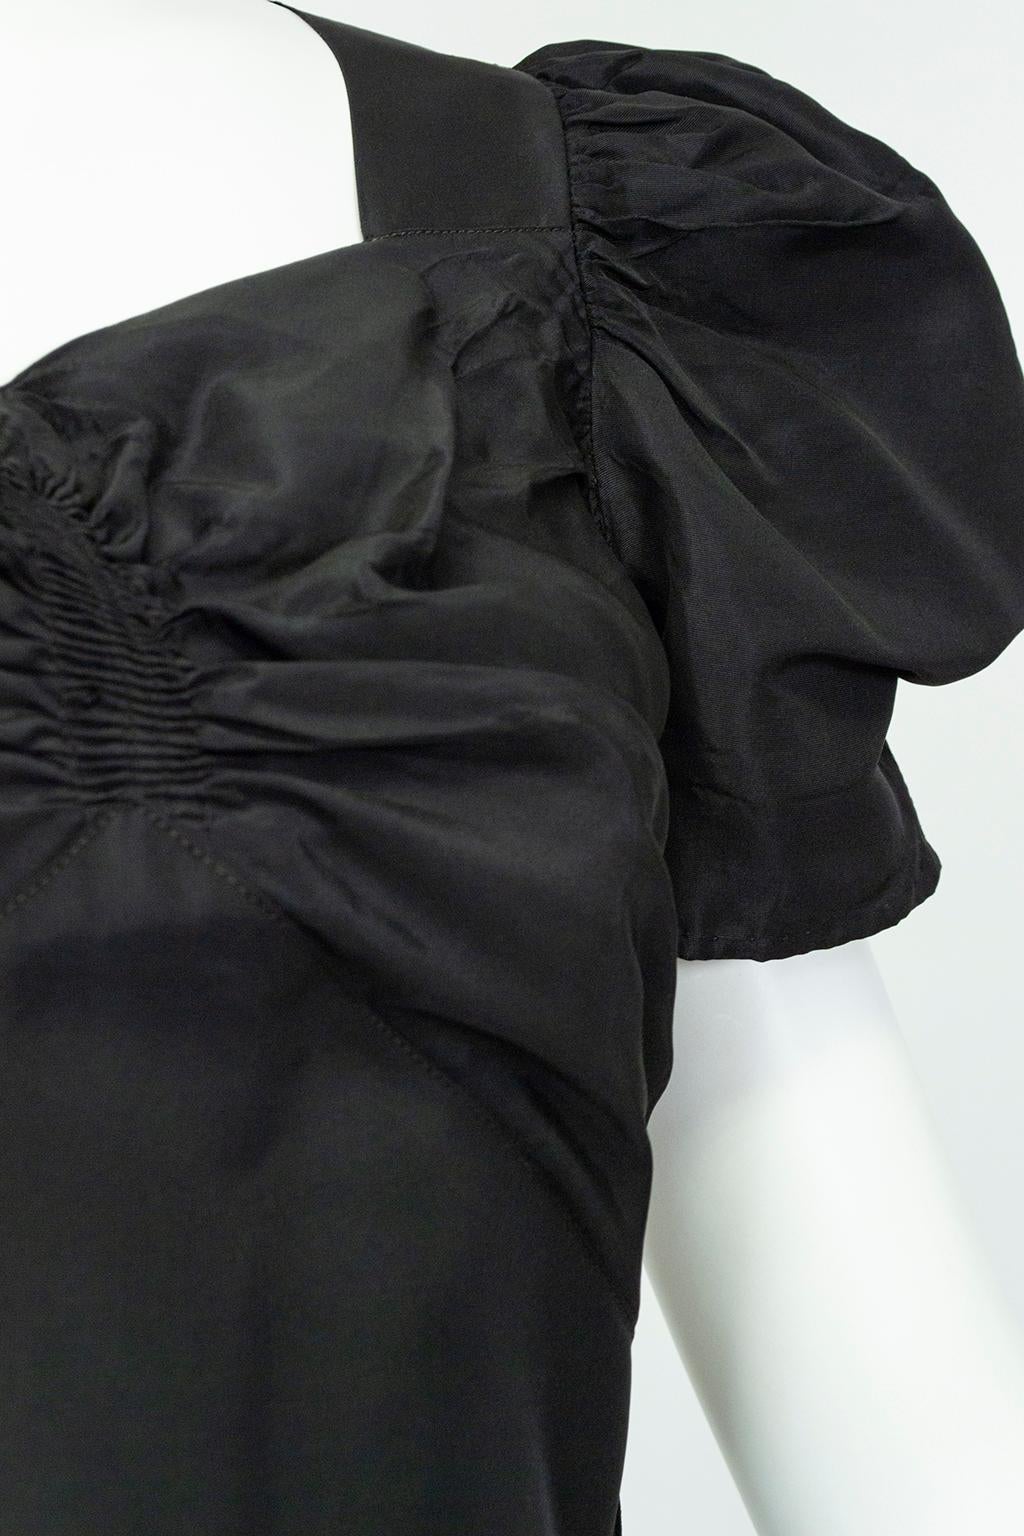 Black Adrian-Inspired Hollywood Regency Gown w Cascading Ruffle Back – XS, 1930s For Sale 1